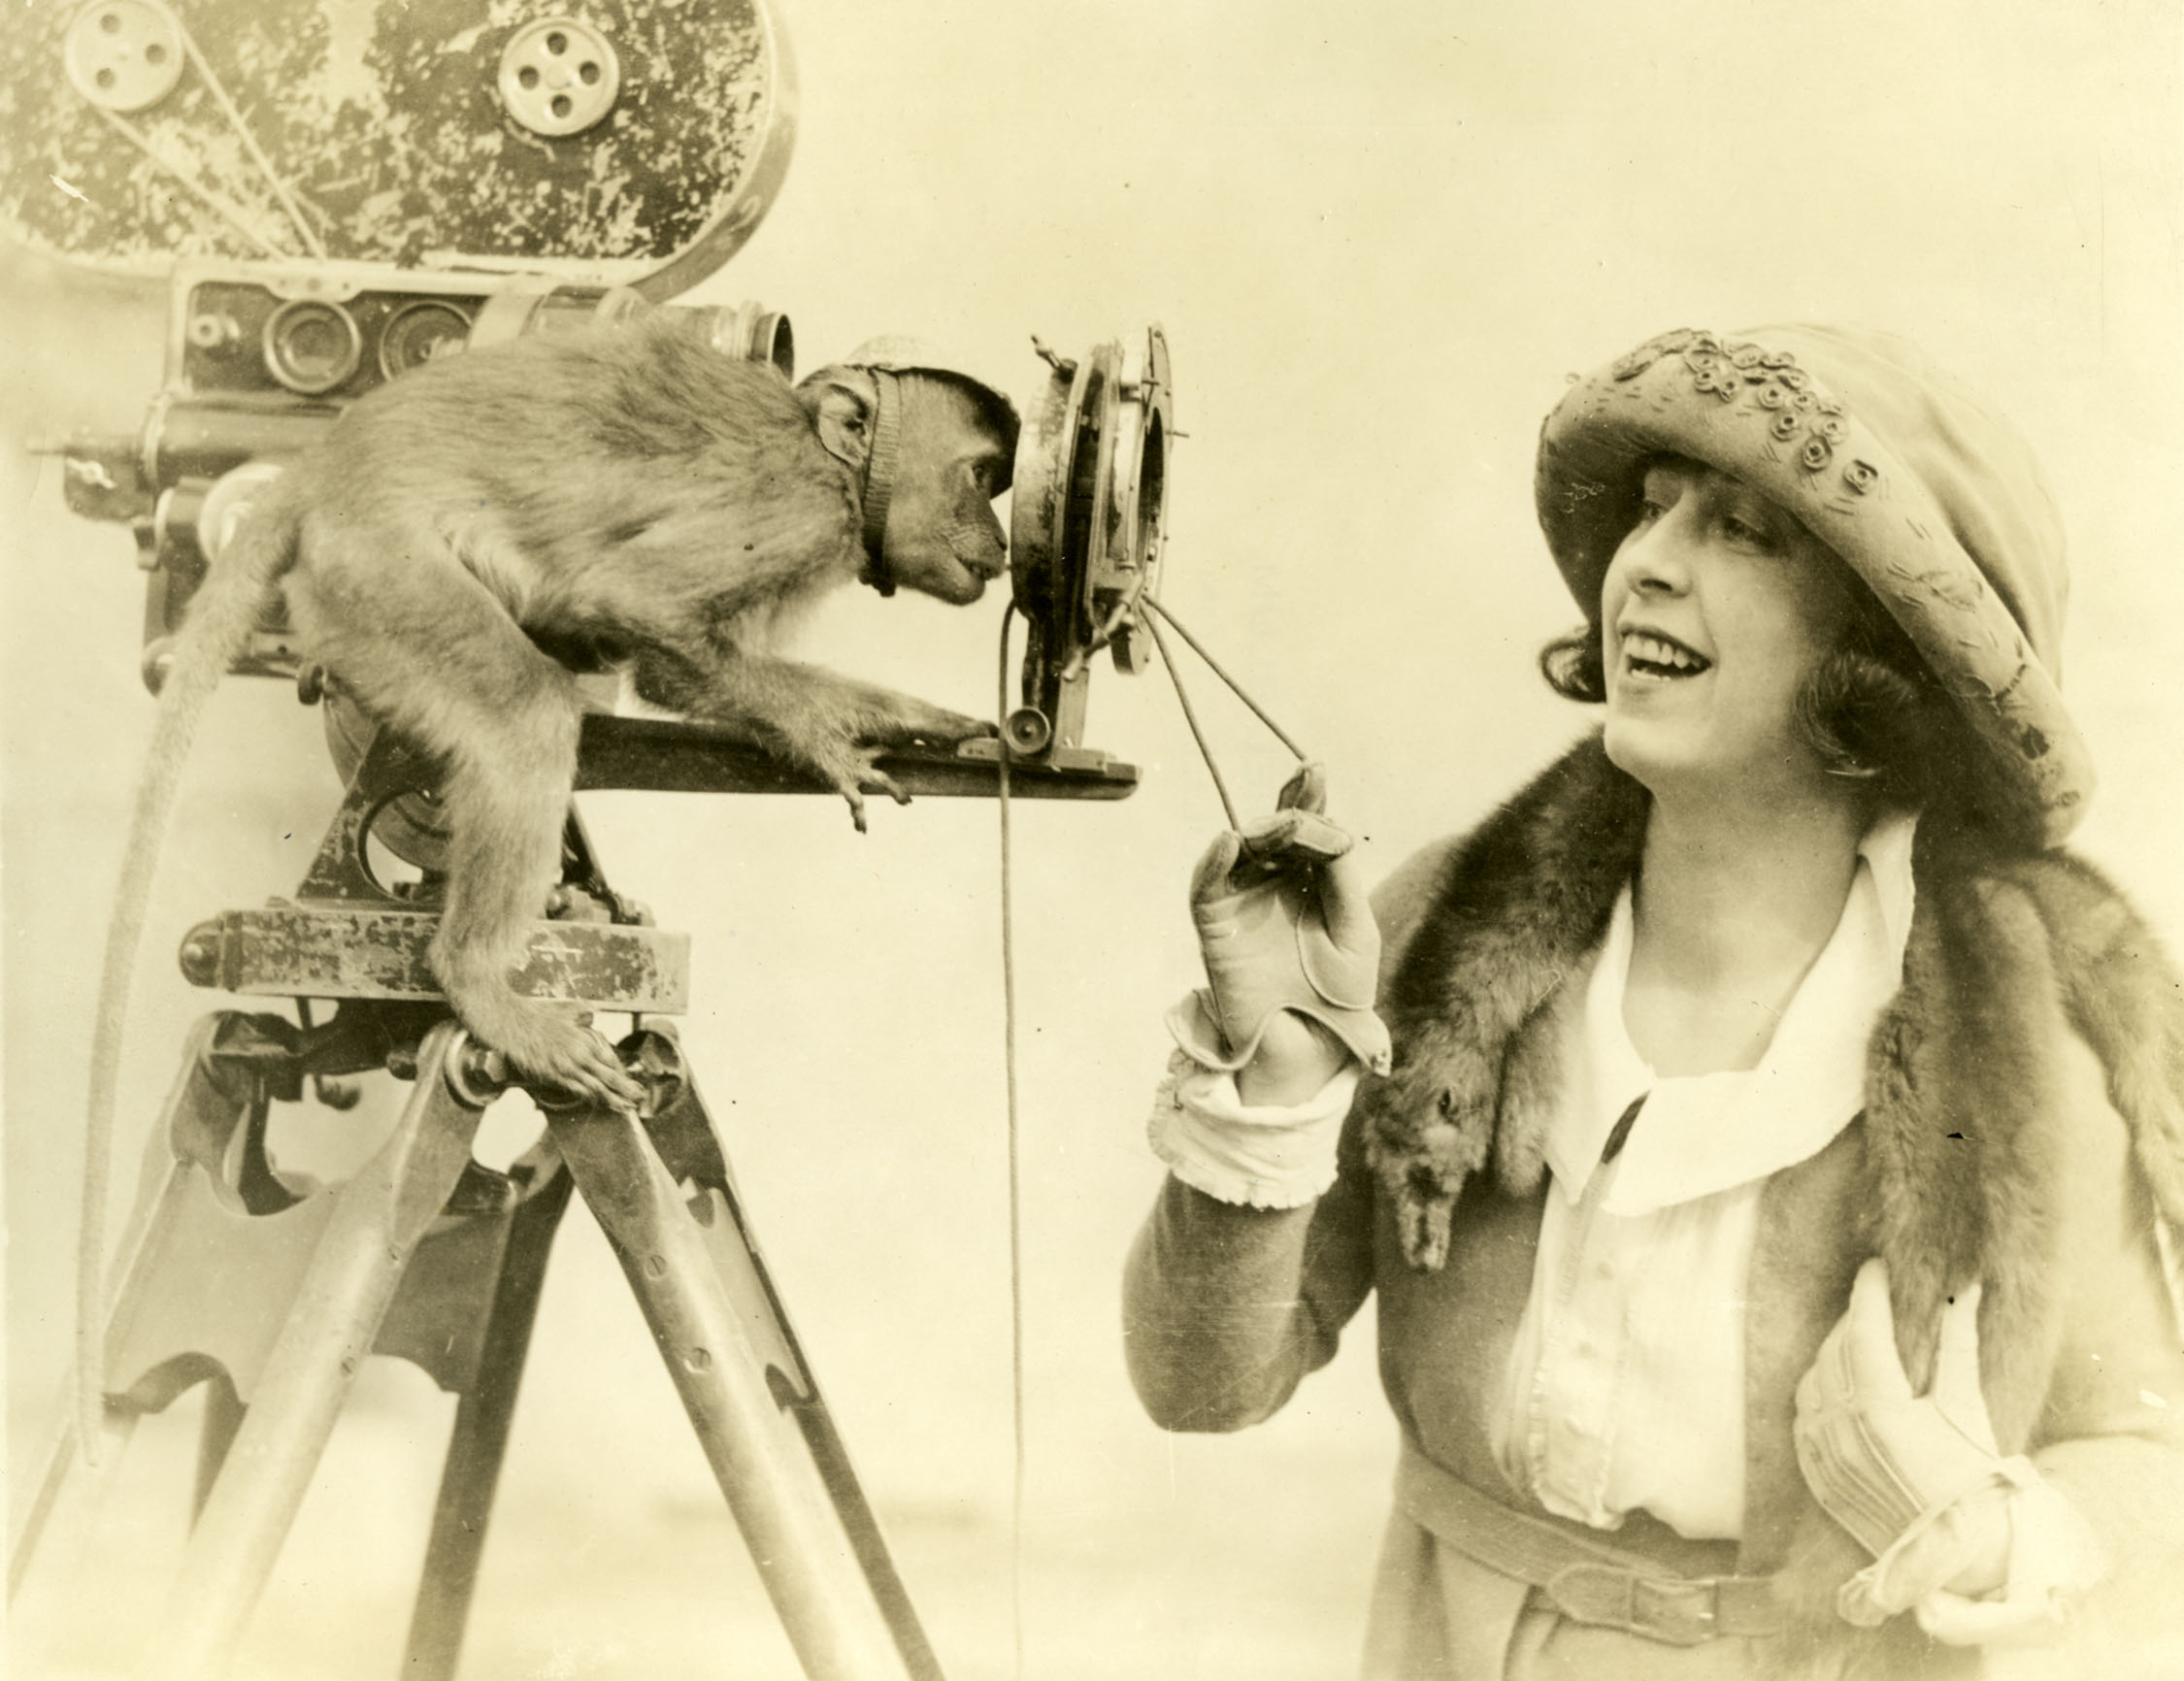 Silent cinema star Dorothy Phillips and her pet monkey, circa 1918. Original caption reads, "This is one of the rare snapshots which a photographer gets only once in a peagreen moon. Dorothy Phillips, star of Allen Holubar’s “The Soul Seeker” is showing simian how a fade out is made with the frontal attachment to the camera. The monk is taking a canny amused interest in the prodeeding (sic)." (Holubar's film was released under the title A Soul for Sale.)